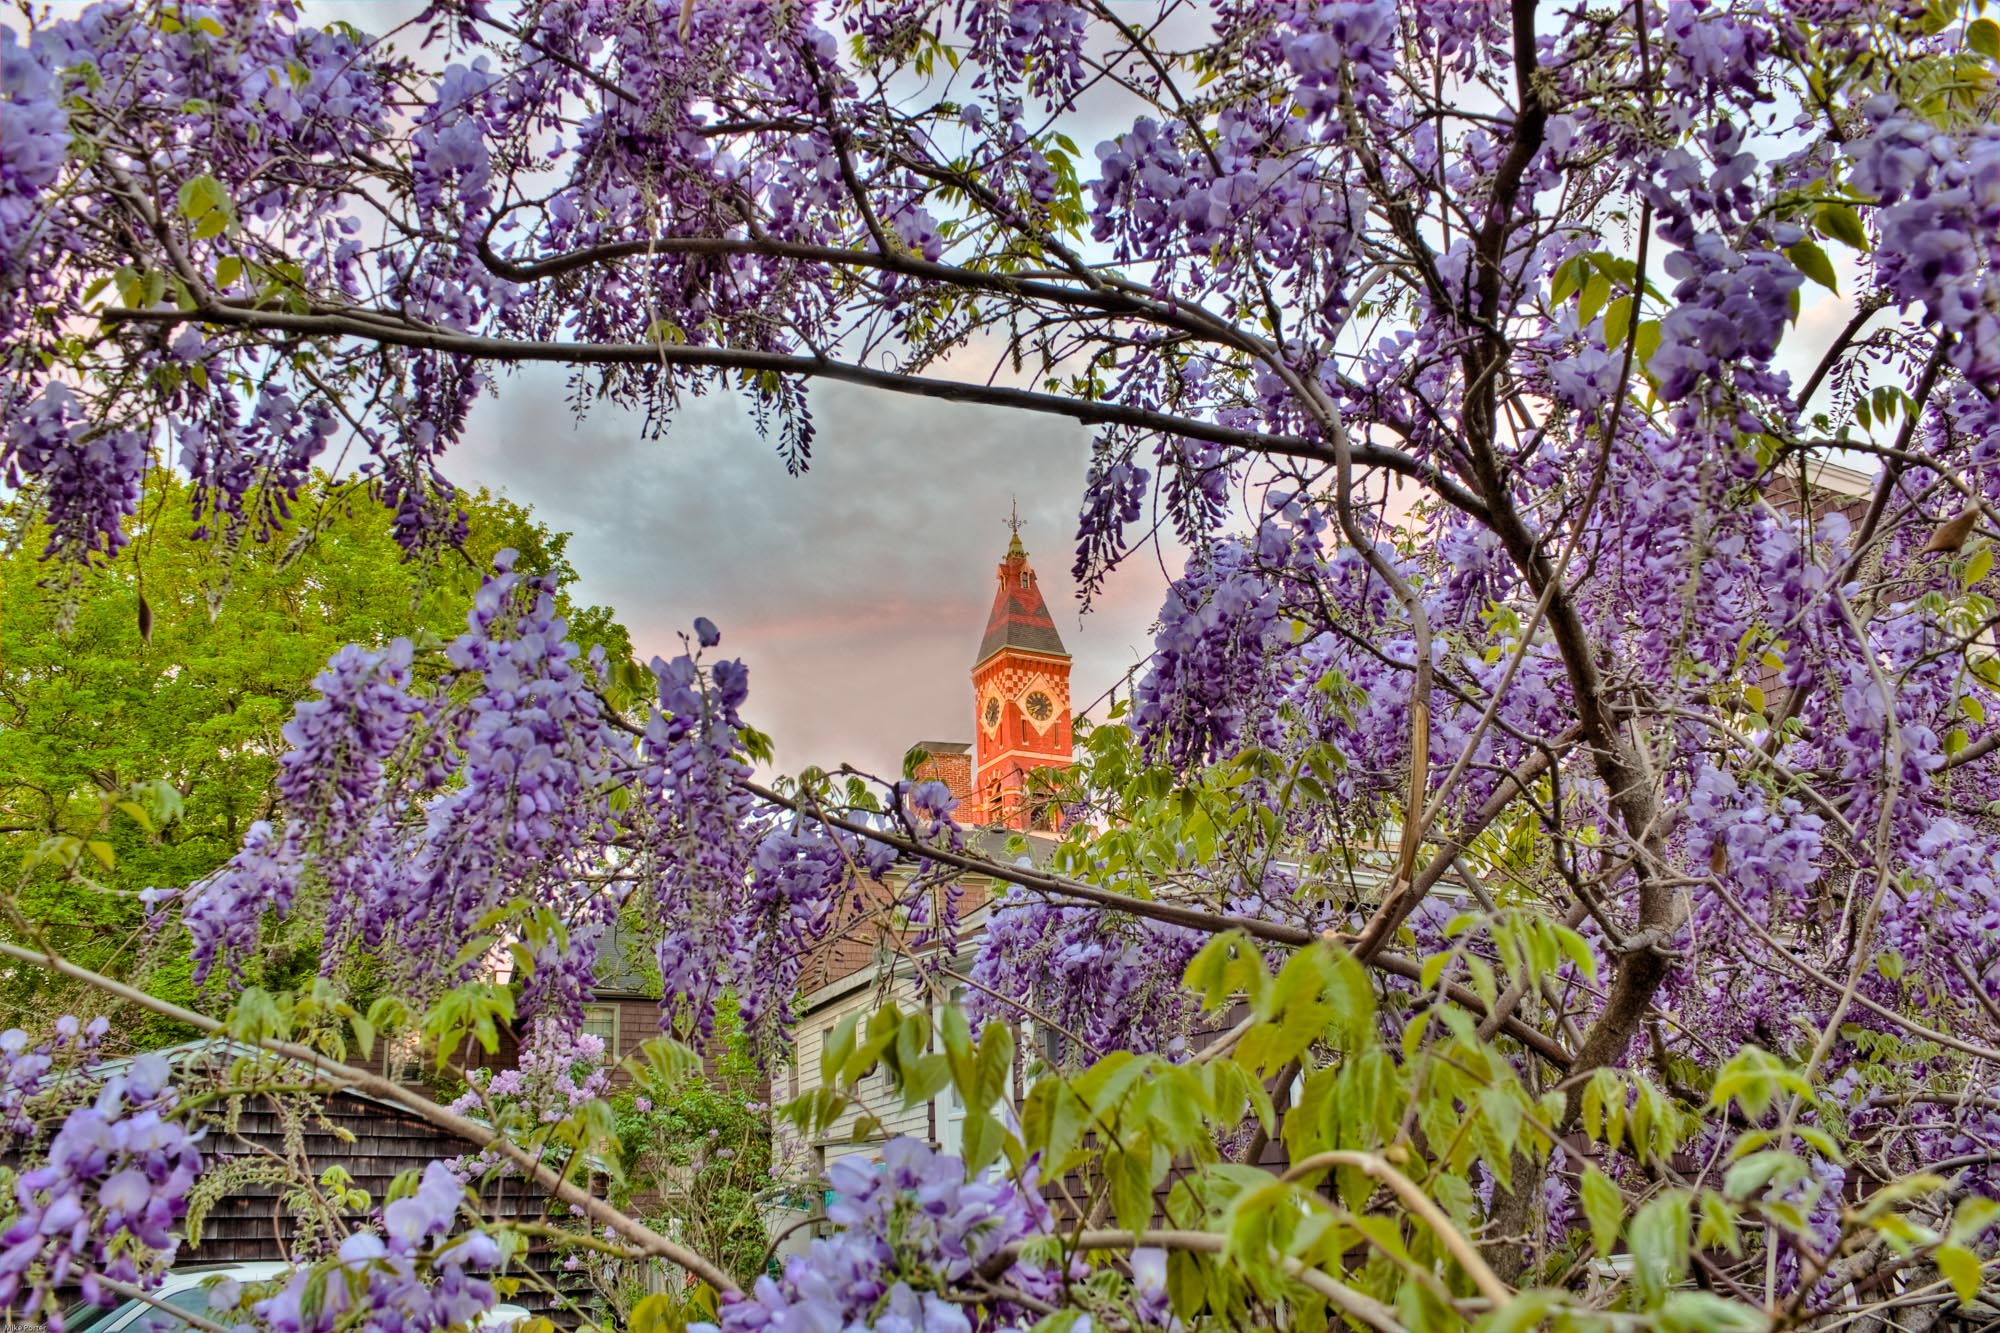 Abbot Hall through the Wisteria